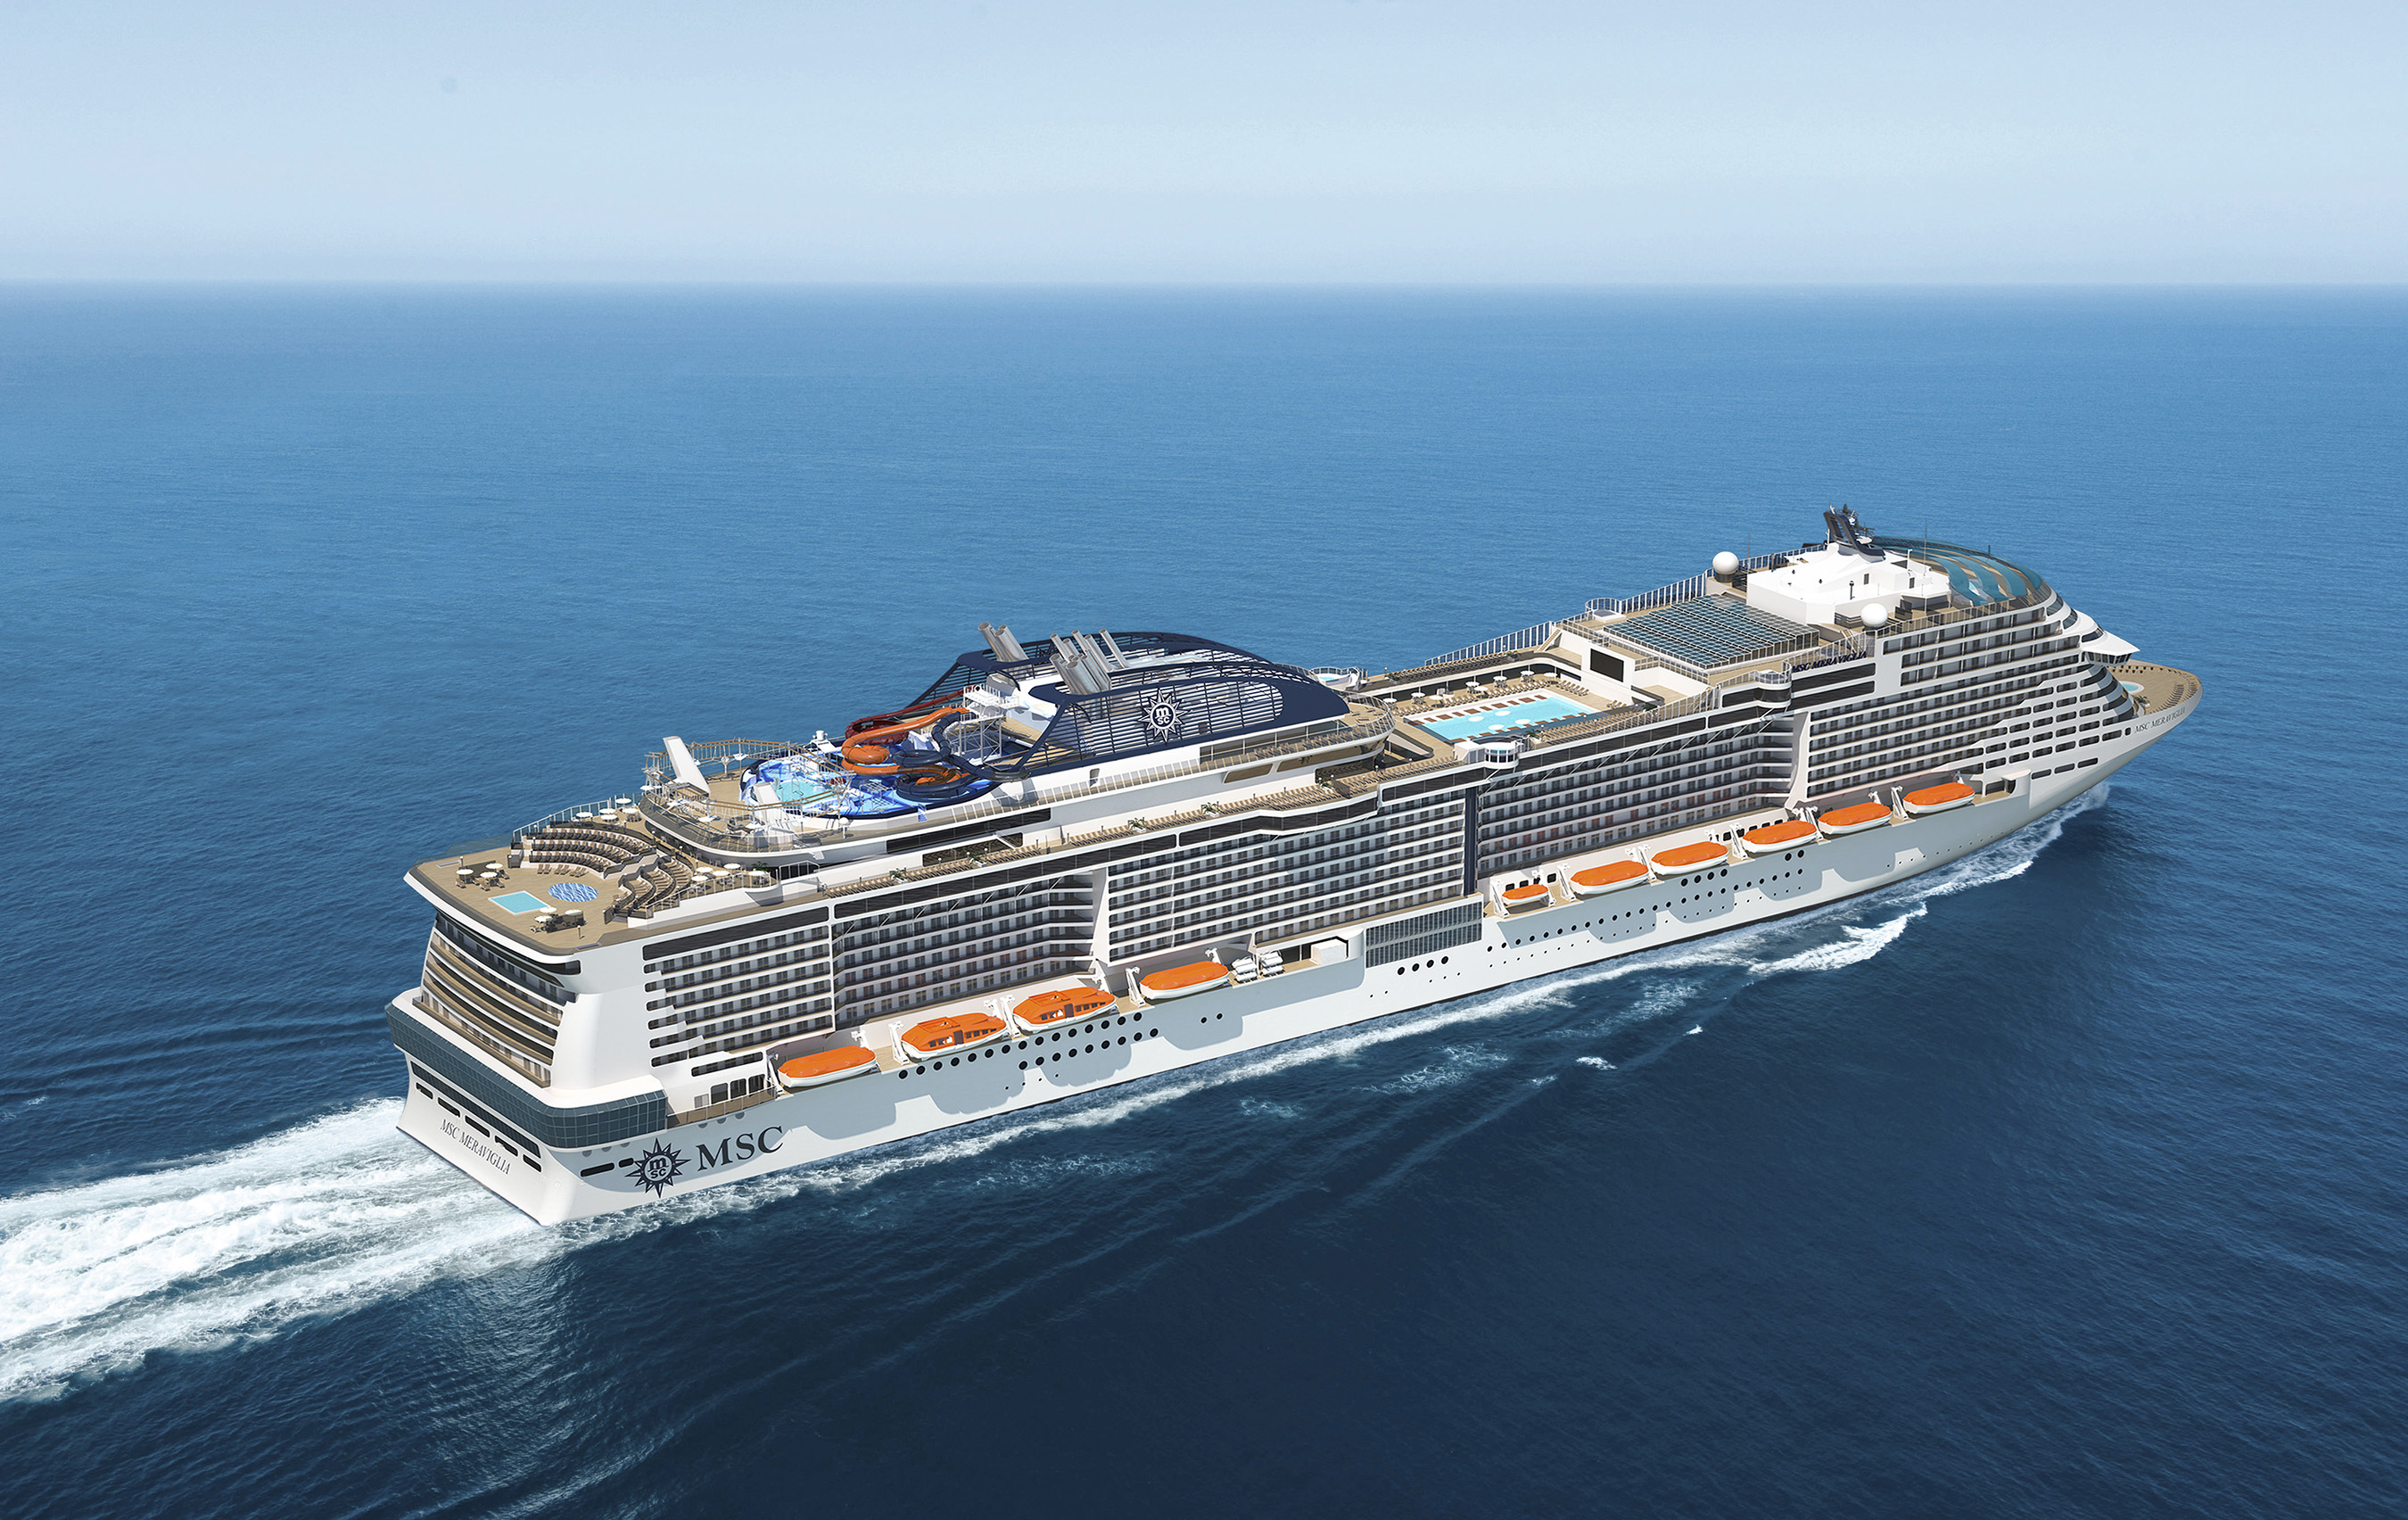 MSC Meraviglia, the new mega smart ship arriving in June 2017, will become the first cruise ship ever to feature an entertainment lounge built specifically for Cirque du Soleil.